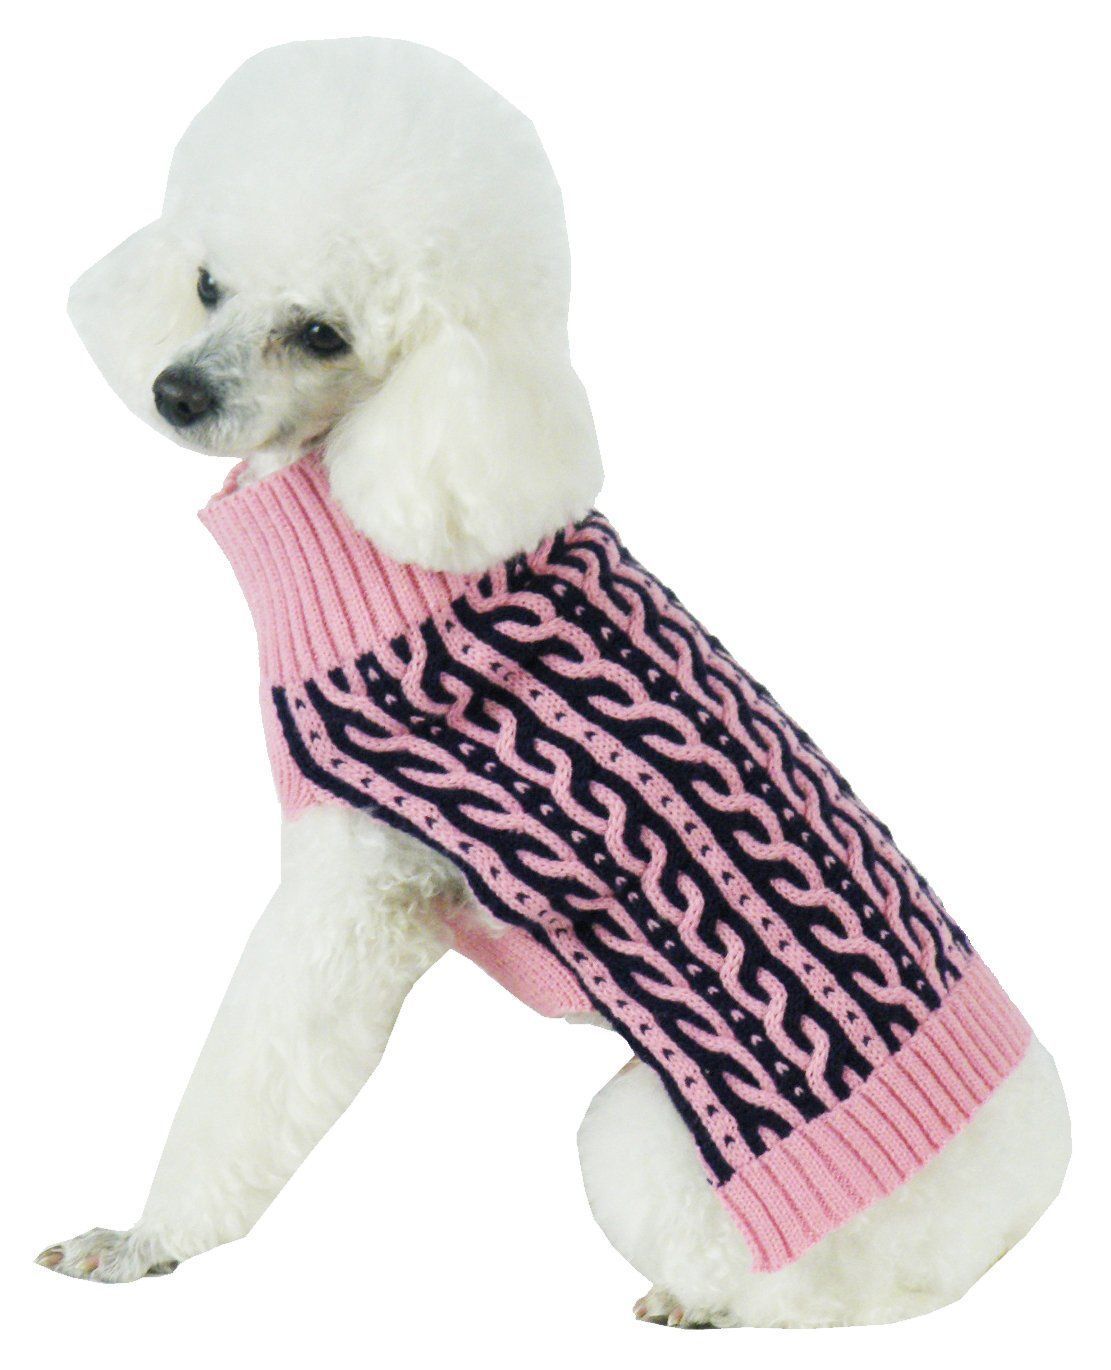 Pet Life ® 'Harmonious' Dual Color Weaved Heavy Cable Knitted Fashion Designer Dog Sweater X-Small Pink And Navy Blue